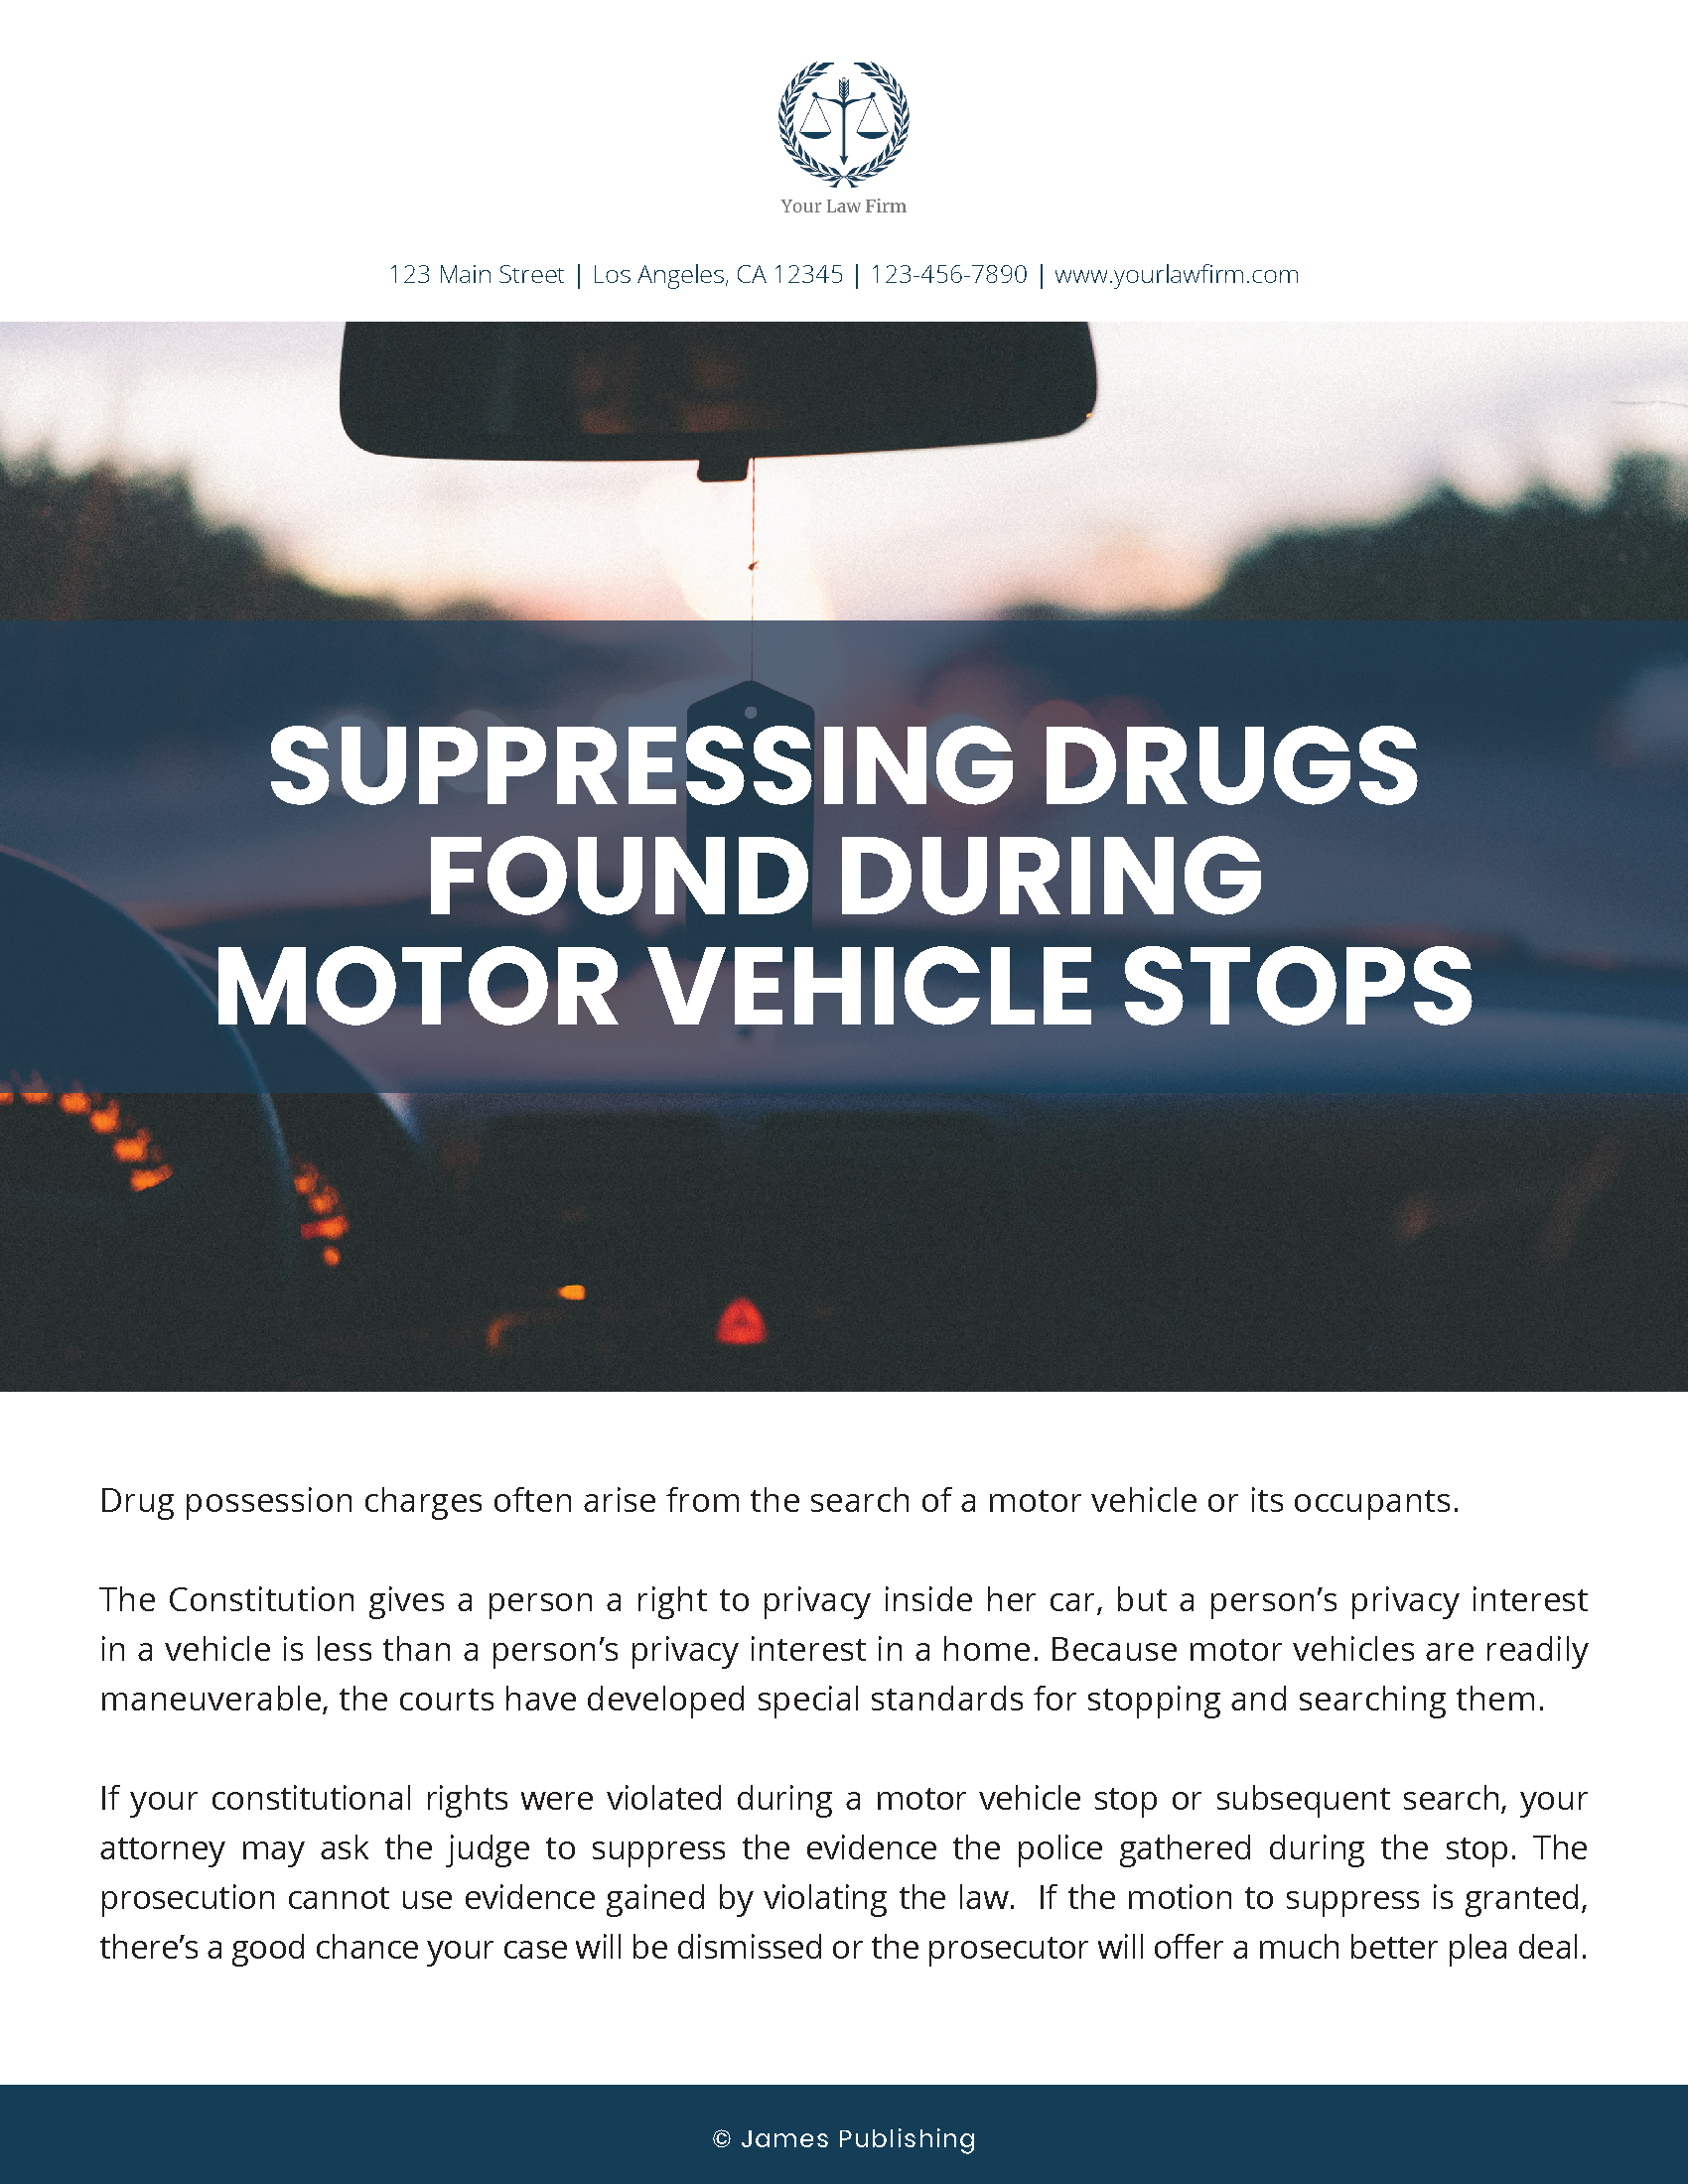 CRIM-33 Suppressing Drugs Found During Motor Vehicle Stops